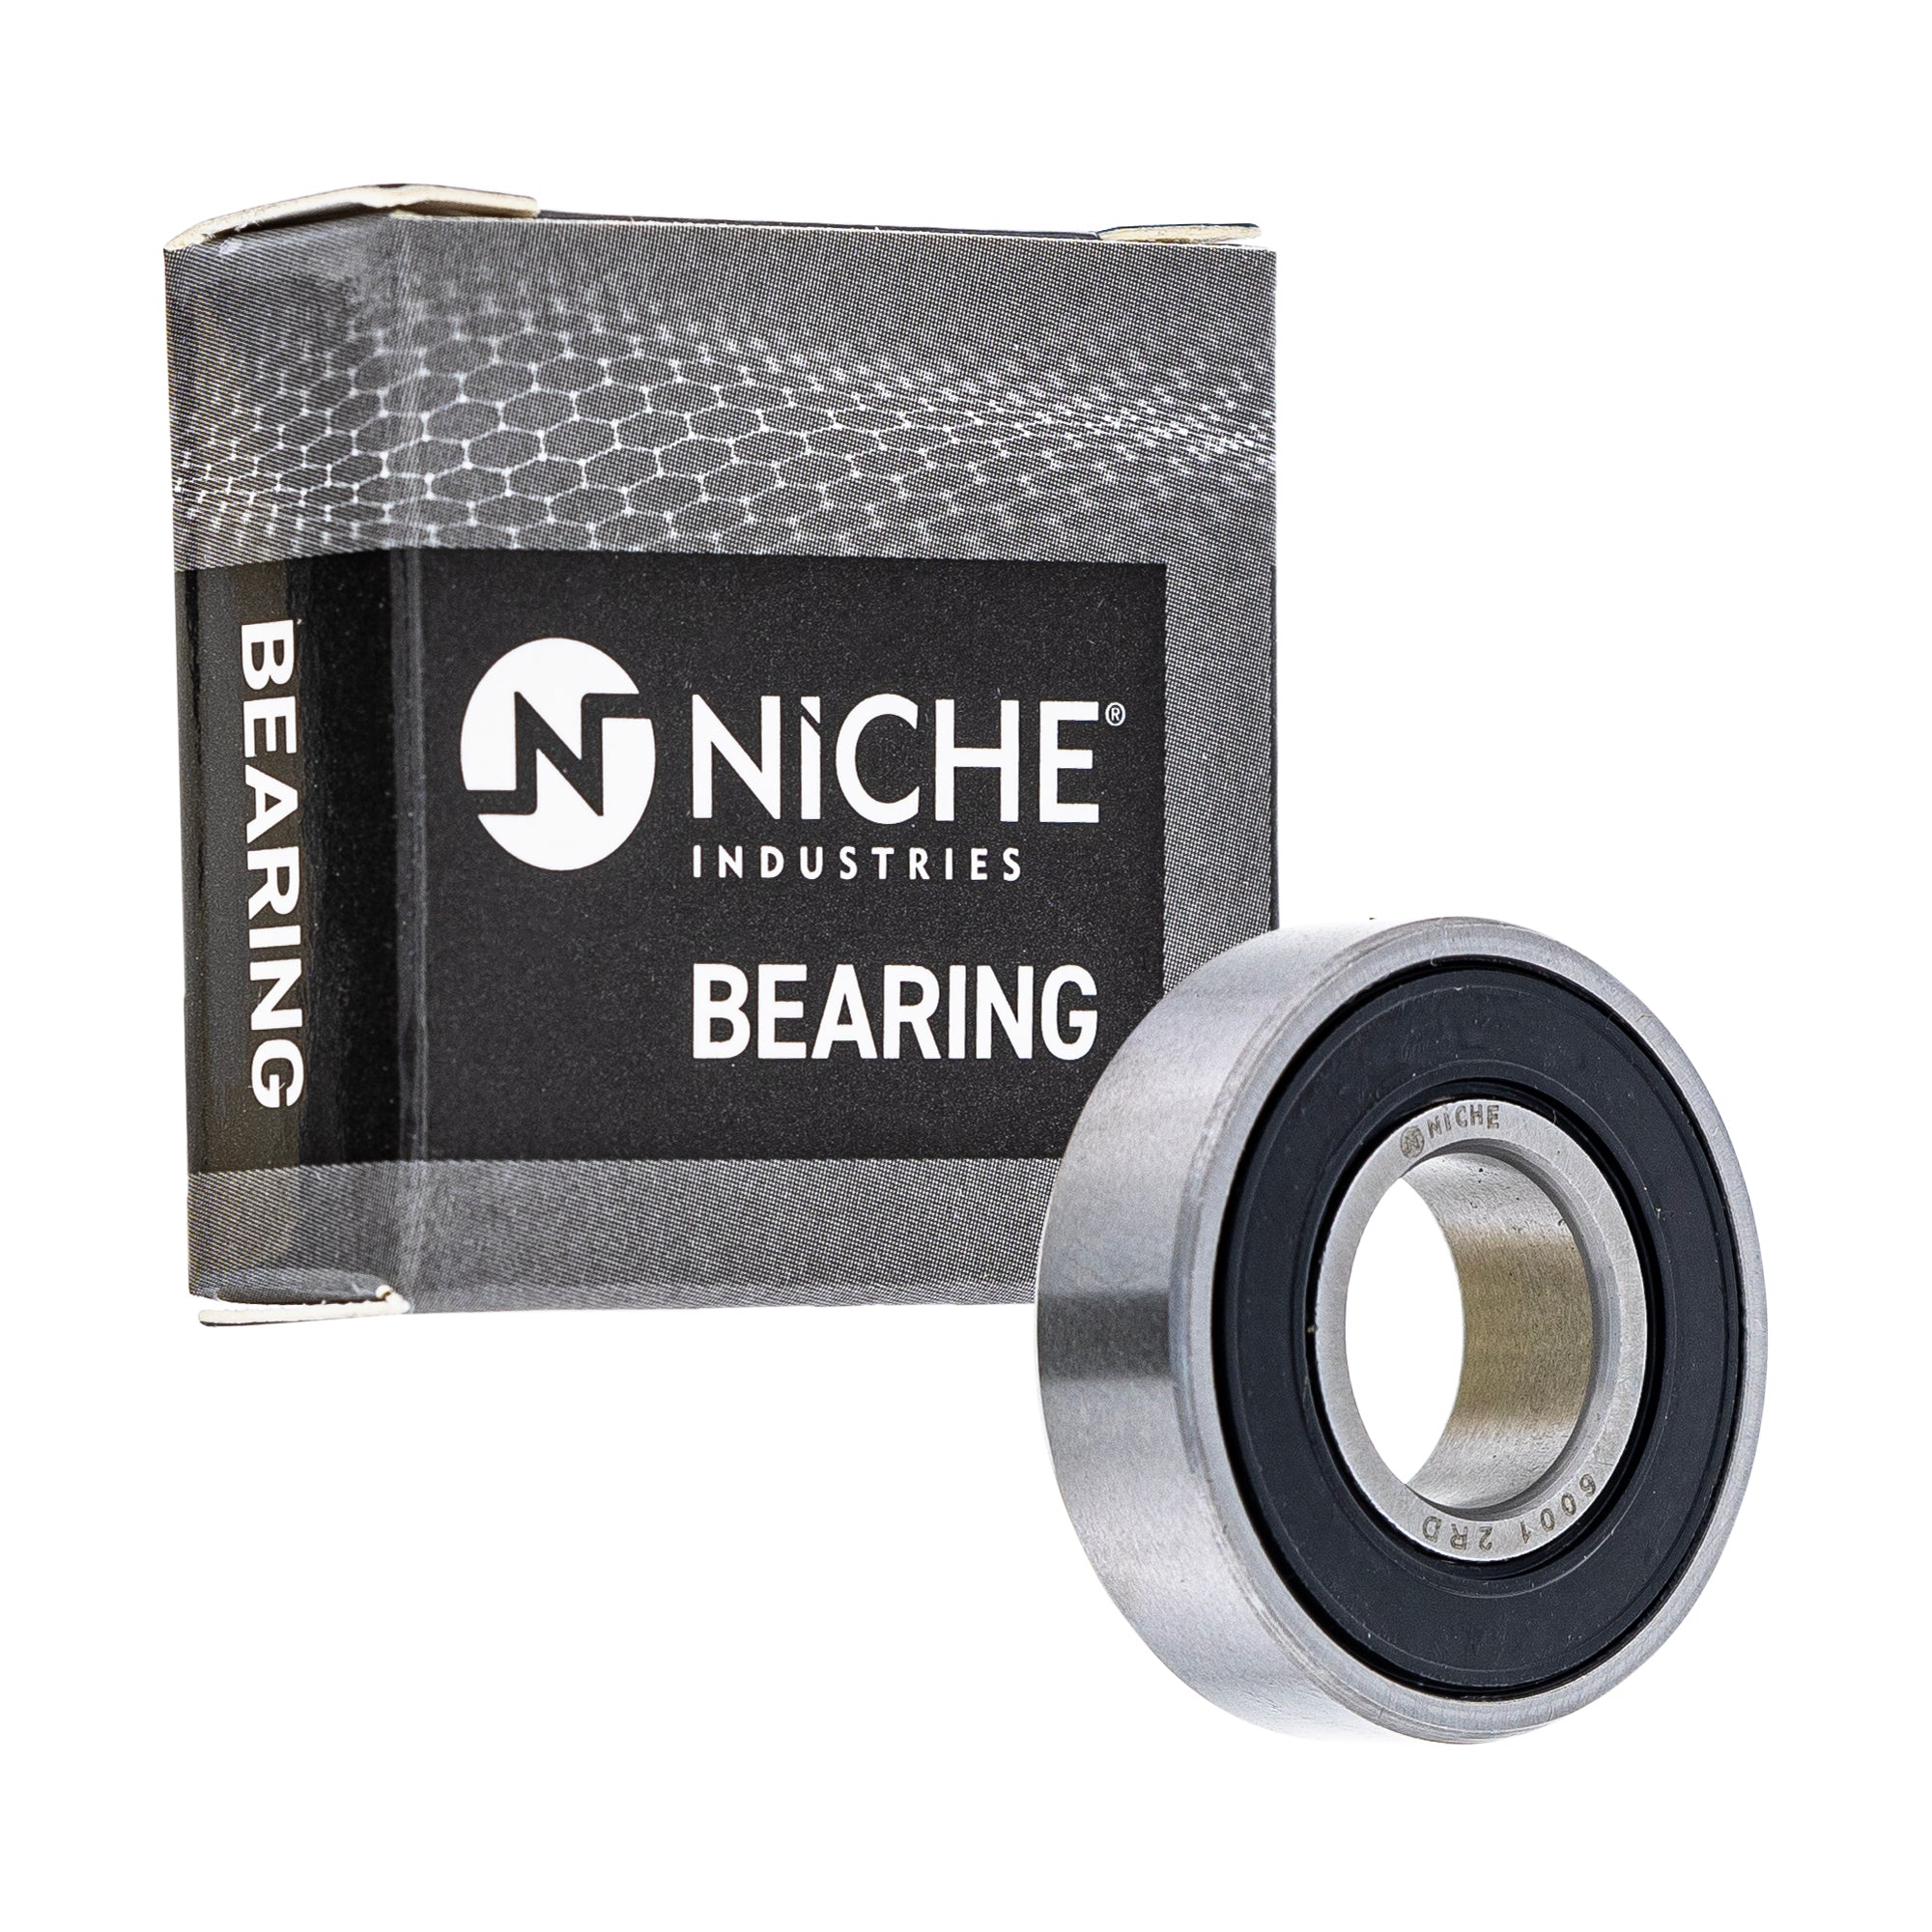 NICHE 519-CBB2333R Bearing 10-Pack for zOTHER YZ80 50